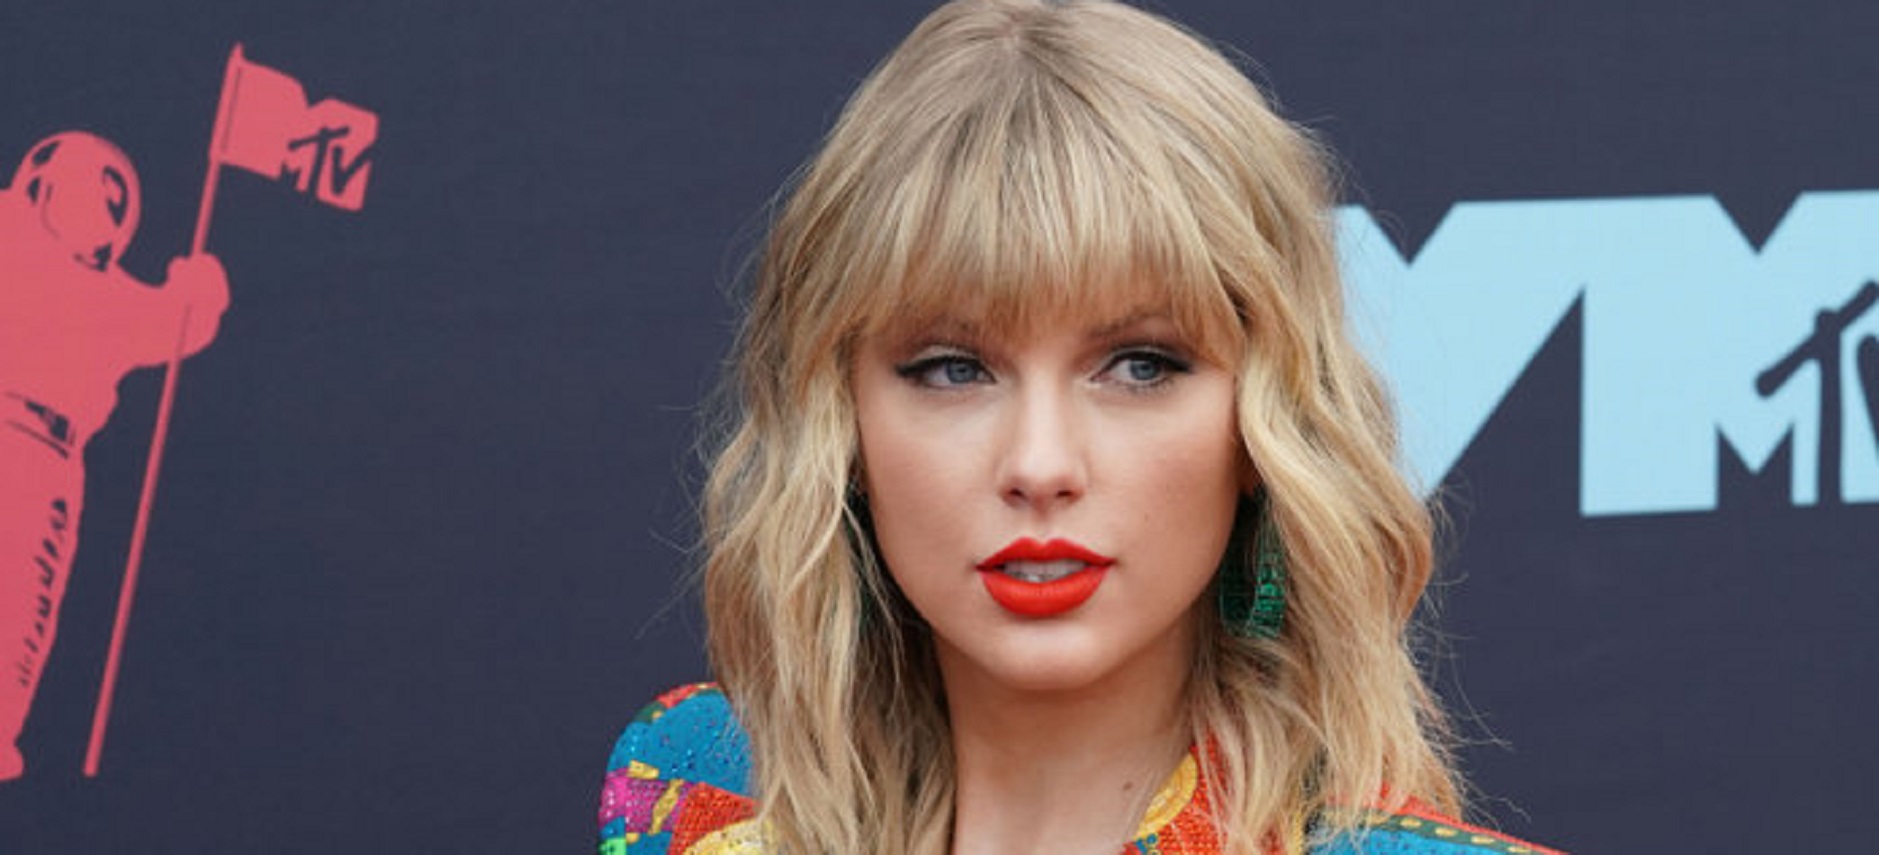 Listen To Taylor Swift’s Politically-Charged New Song – ‘Only The Young’